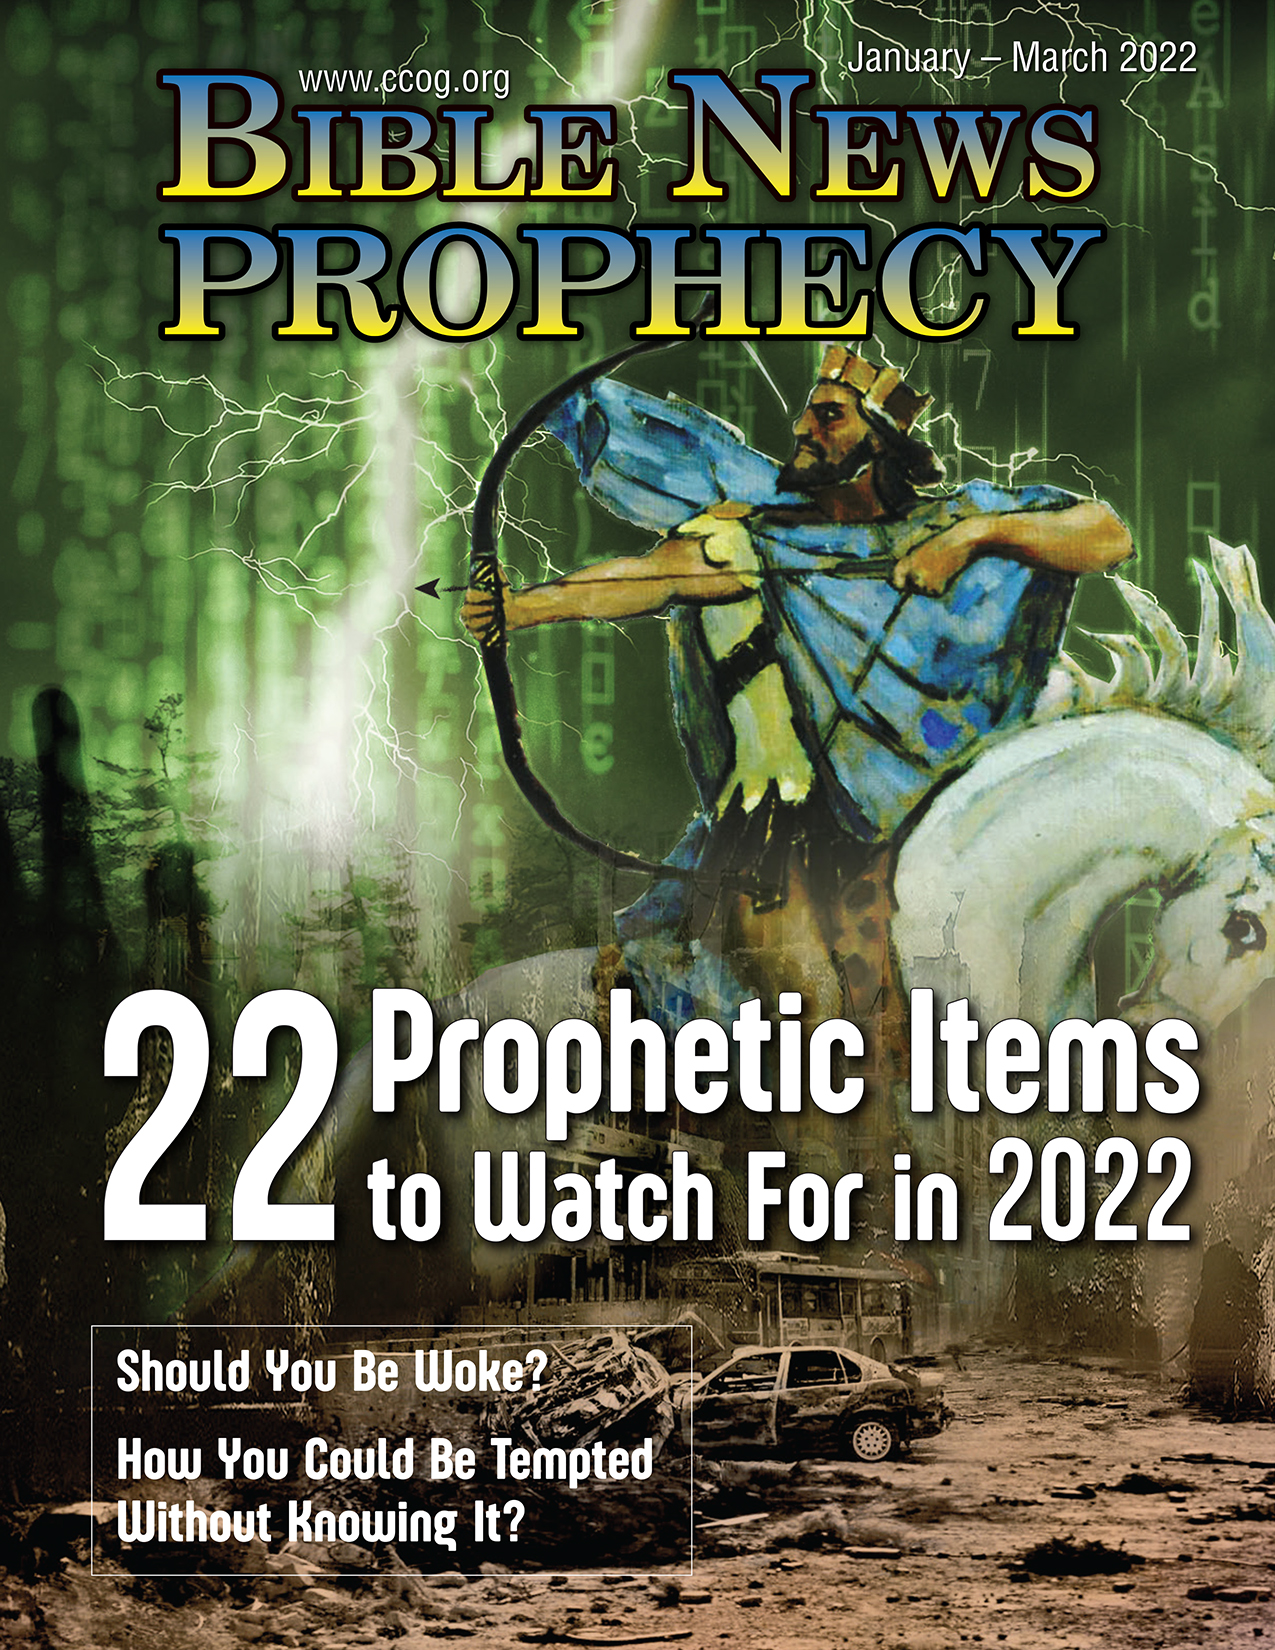 Bible News Prophecy January – March 2022: 22 Prophetic Items to Watch in 2022